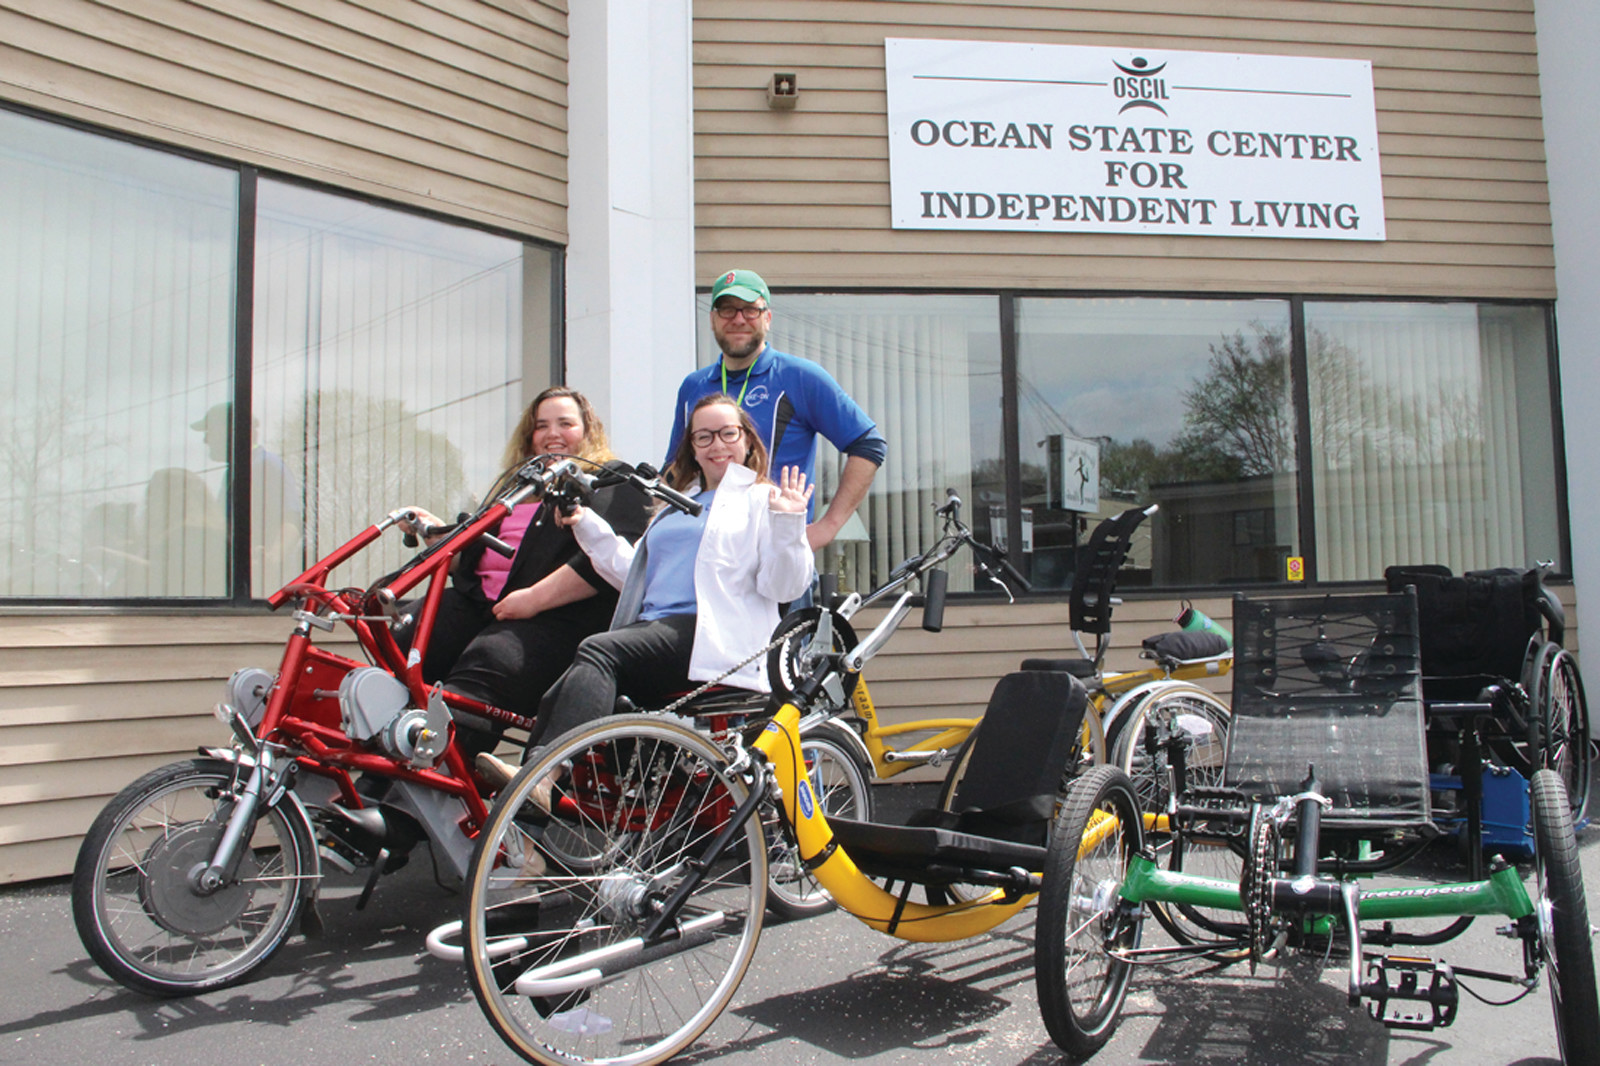 RIDING BY: Bike-On visited Ocean State Center for Independent Living in March with some of their adaptive hand cycles, recumbent trikes and special needs pediatric trikes. Pictured are Bike-On employees Dan Bizzle and Rachel Anderson as well as OSCIL’s Lunch and Learn Coordinator Heather Schey, at left.